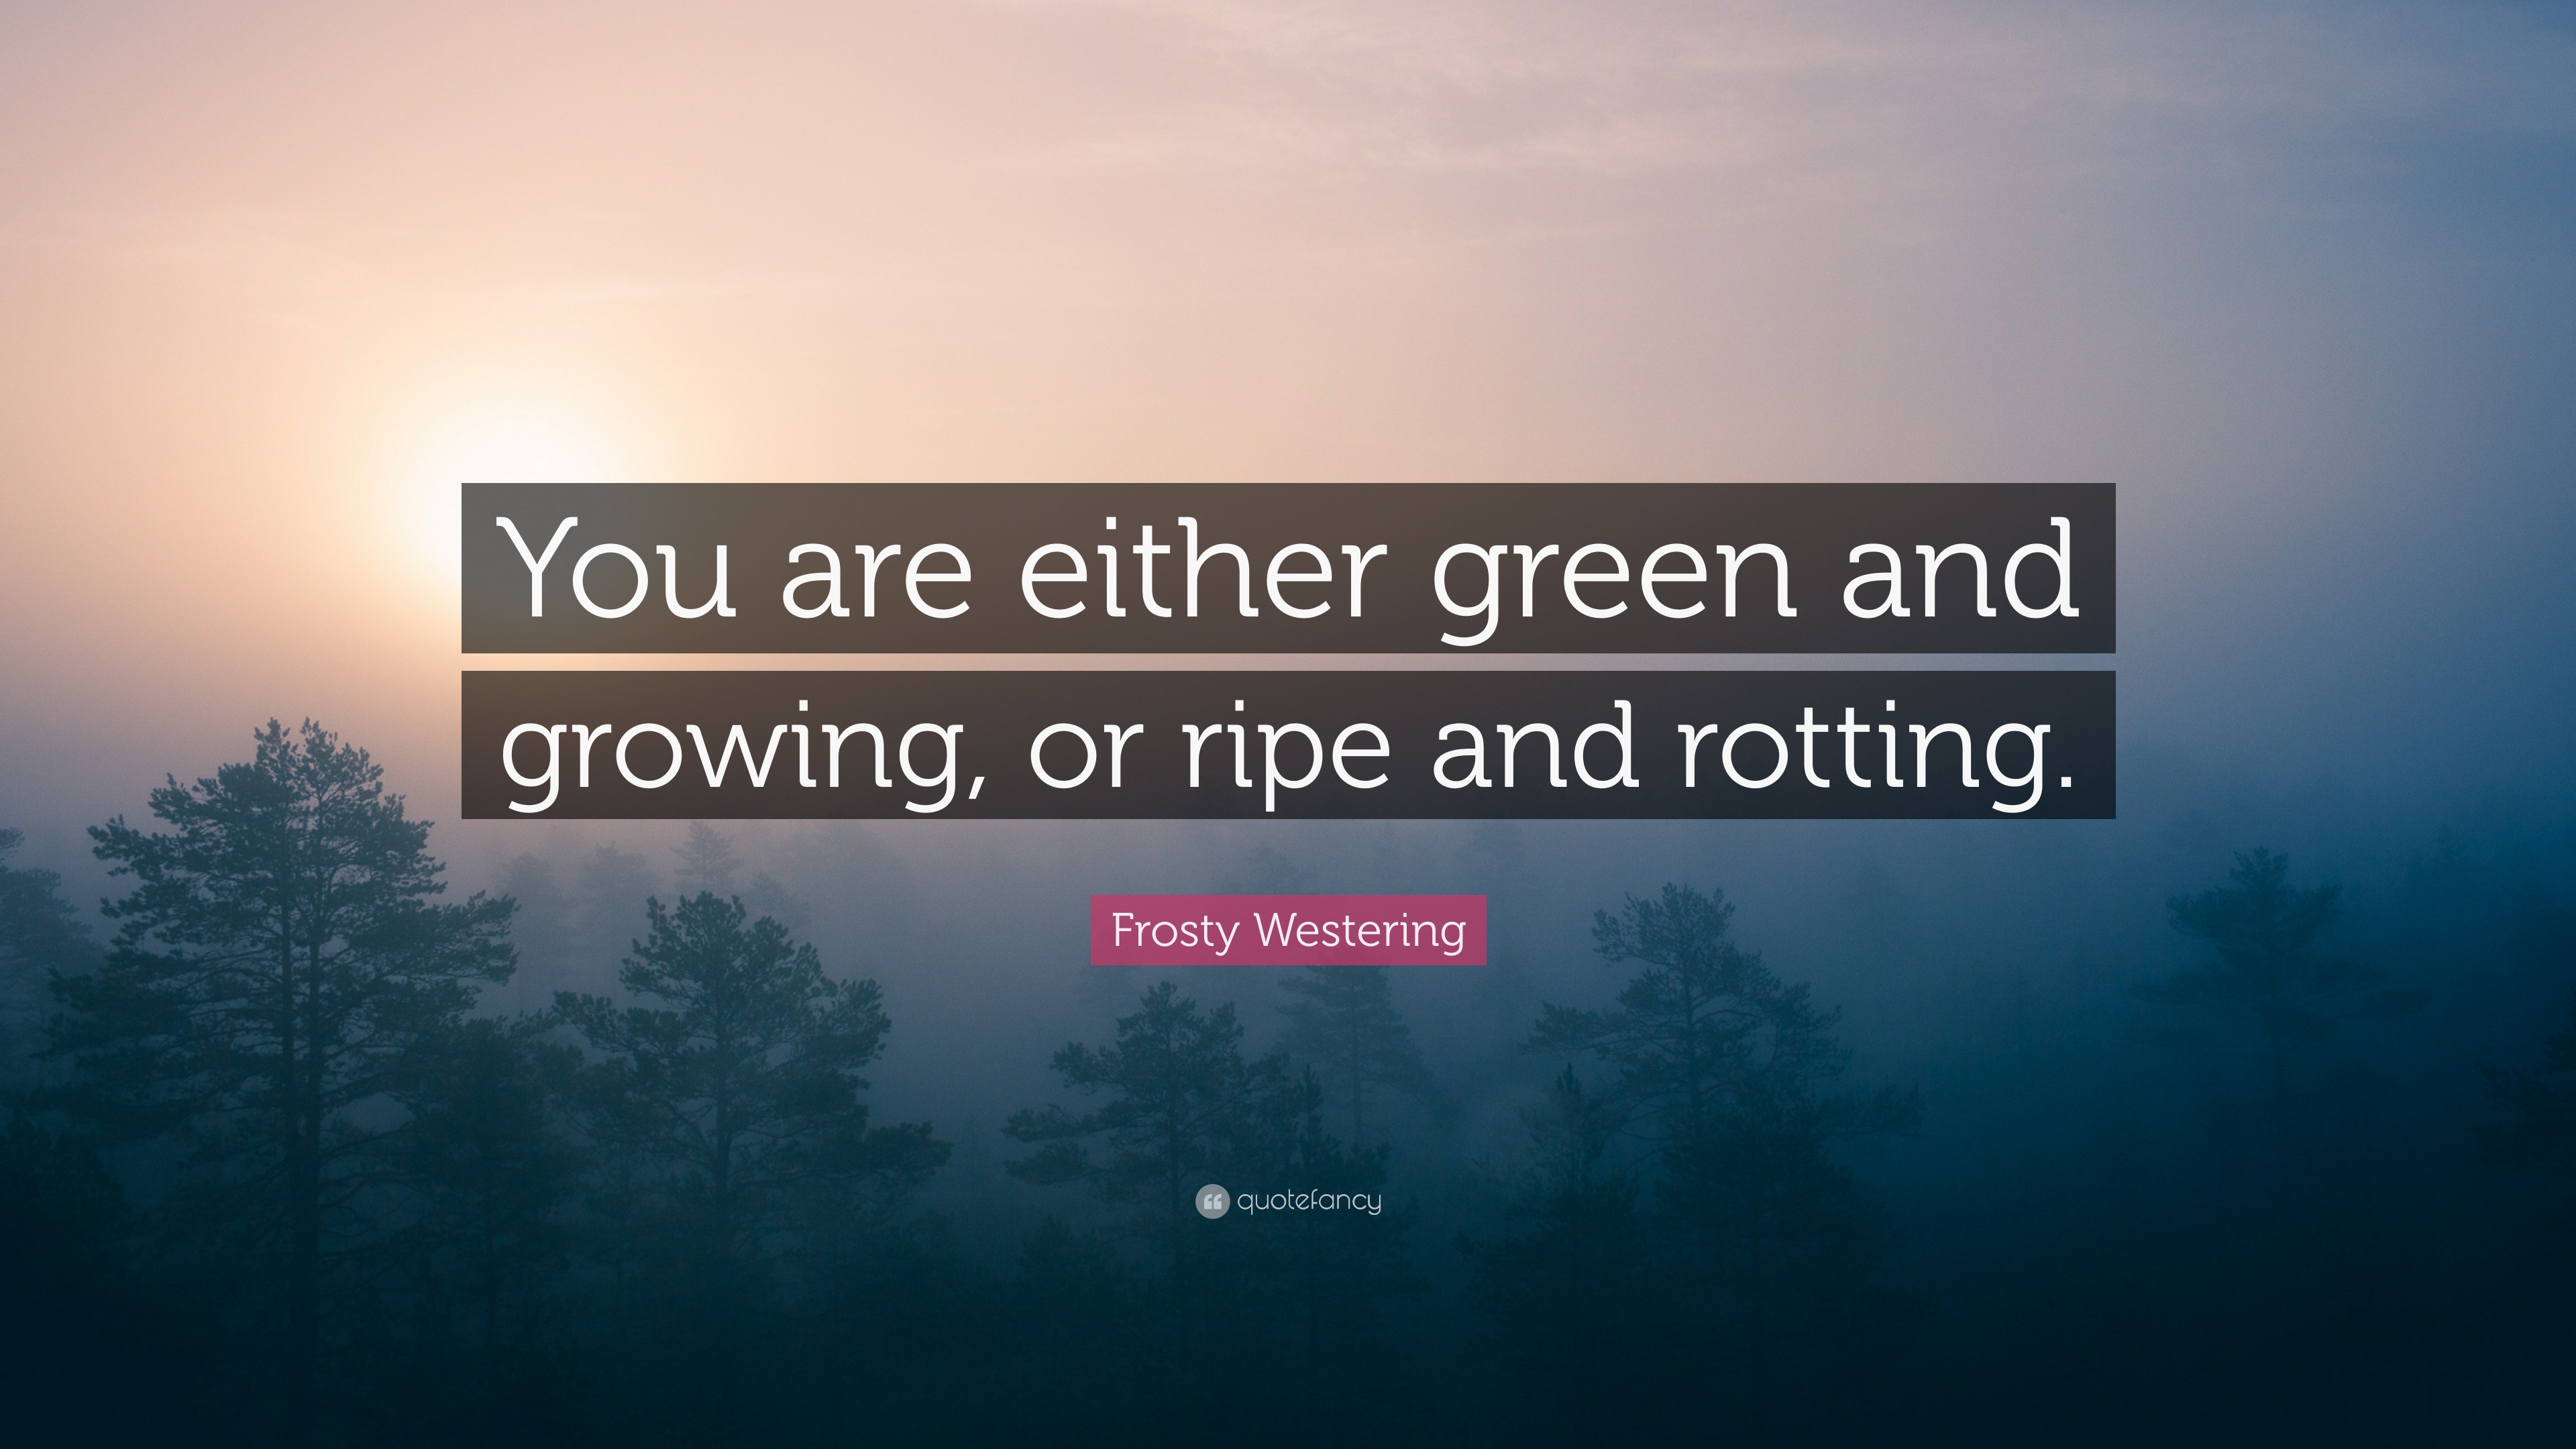 Frosty Westering Quote: “You are either green and growing, or ripe and